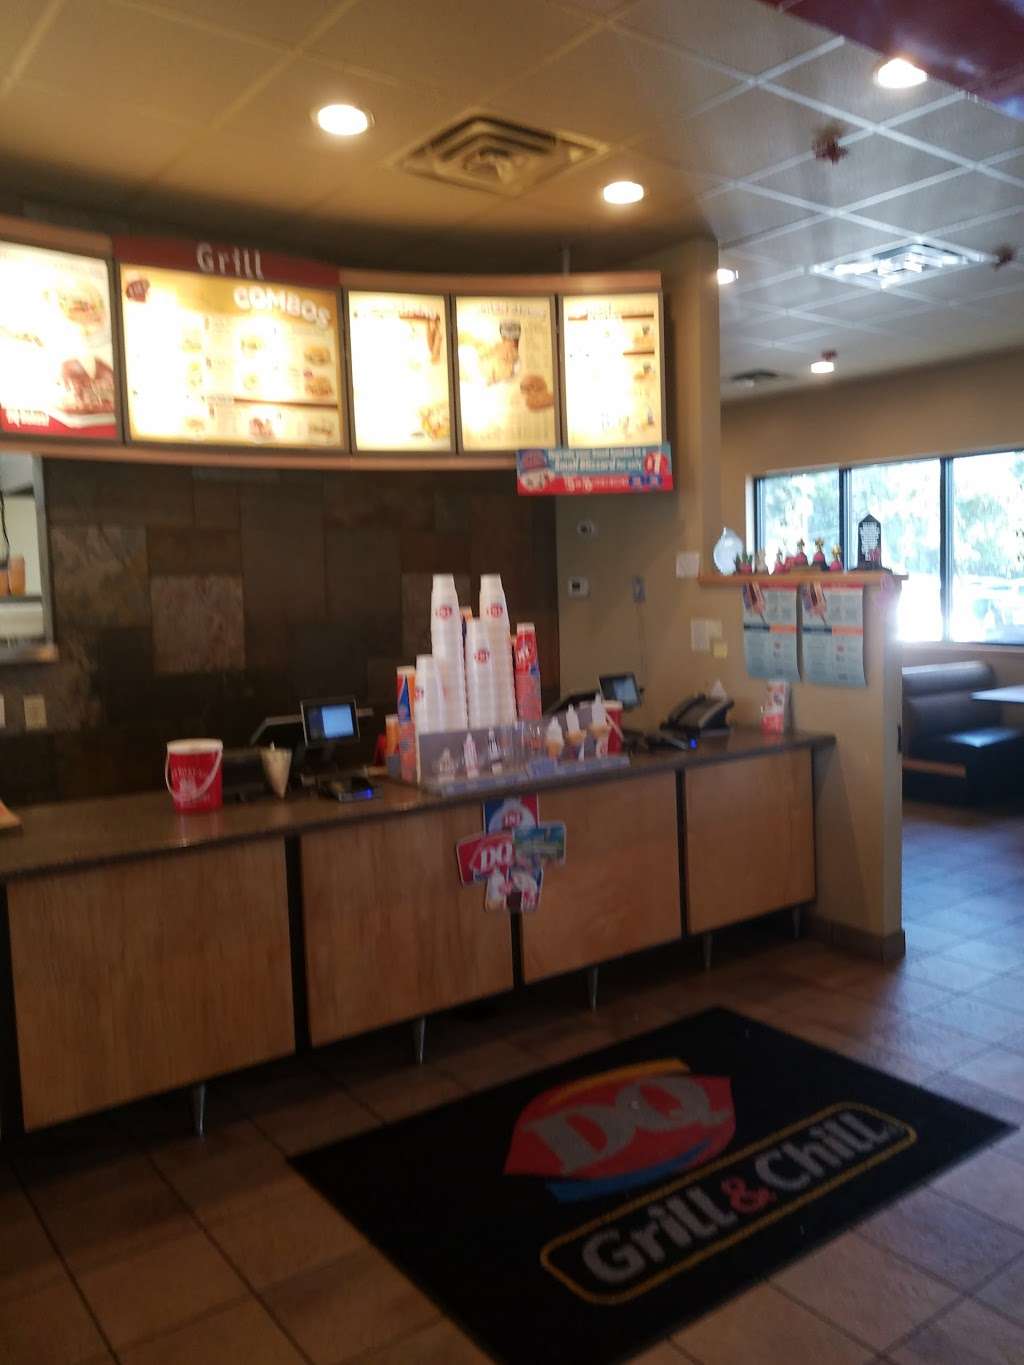 Dairy Queen Grill & Chill | 951 N Rangeline Rd, Carmel, IN 46032, USA | Phone: (317) 846-5256